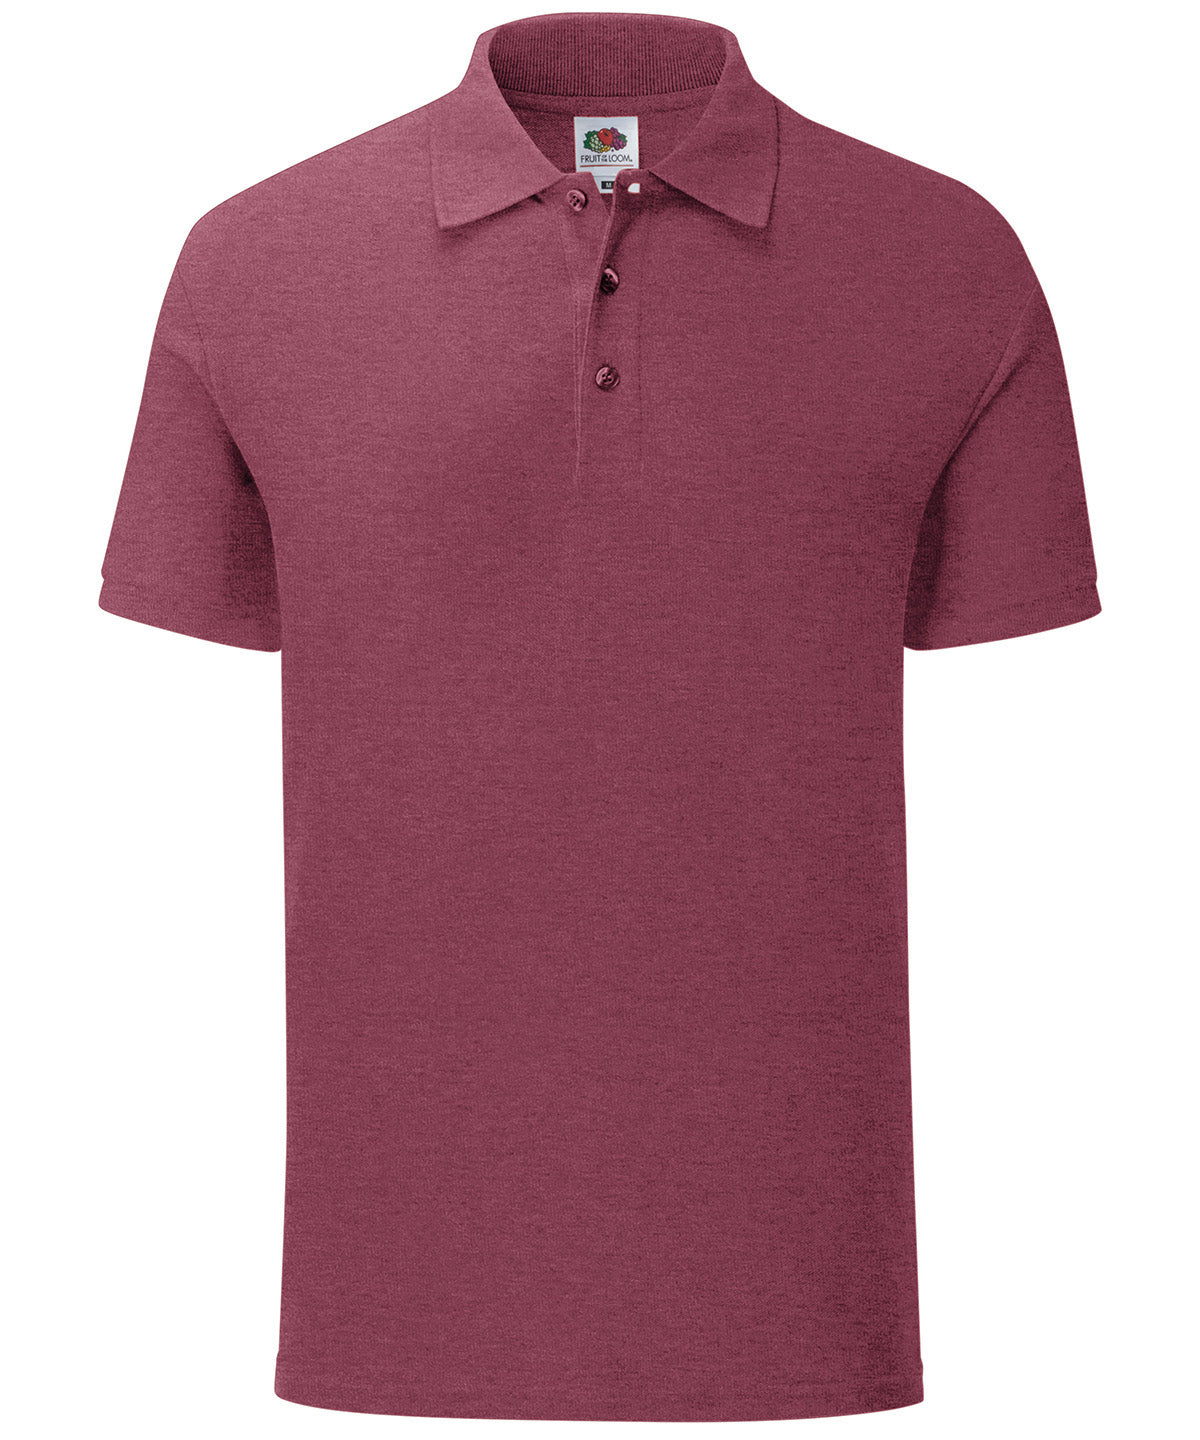 Personalised Polo Shirts - Royal Fruit of the Loom Iconic polo